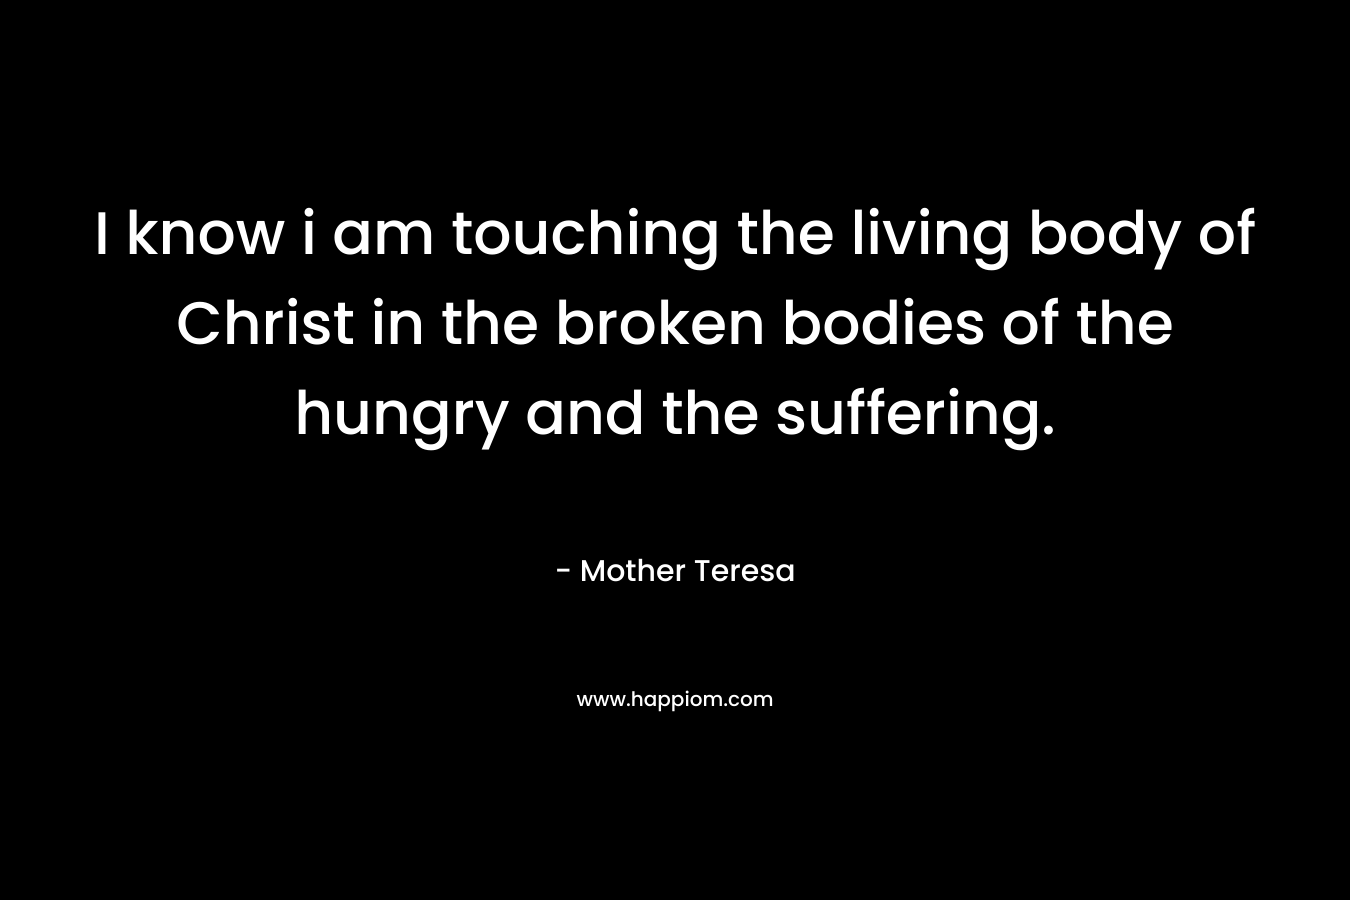 I know i am touching the living body of Christ in the broken bodies of the hungry and the suffering. – Mother Teresa